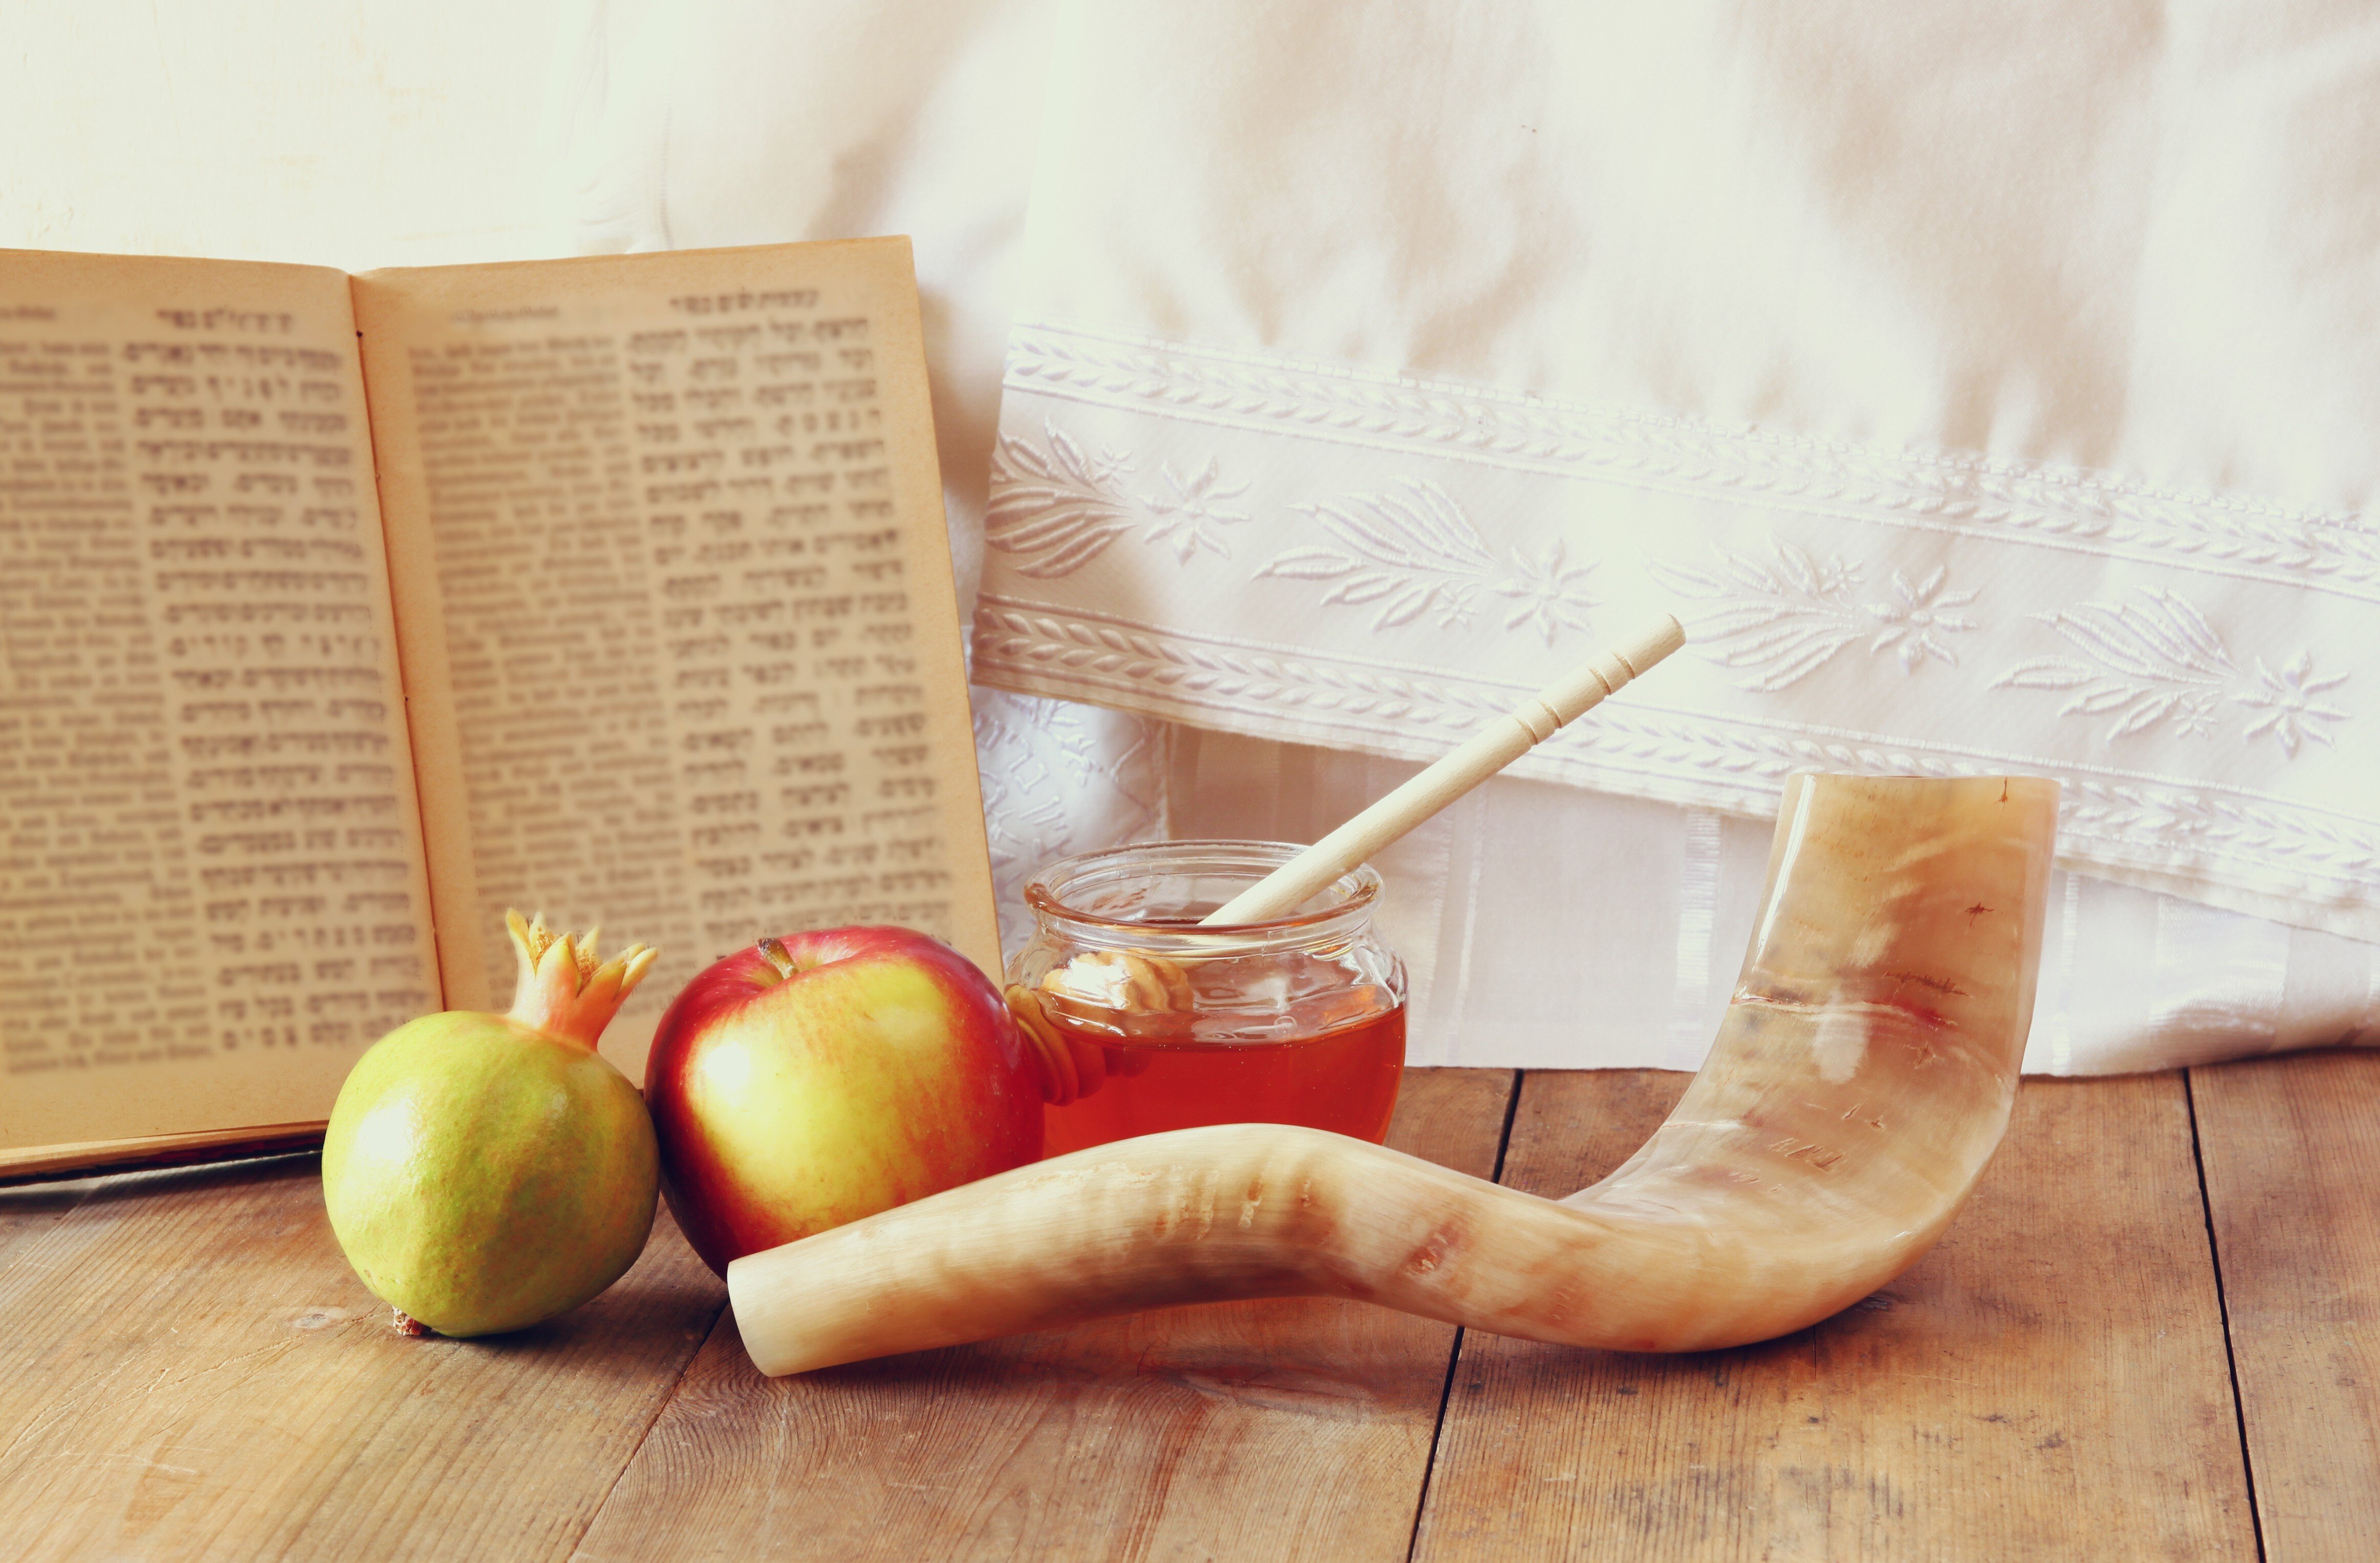 These items are important symbols for Rosh Hashanah